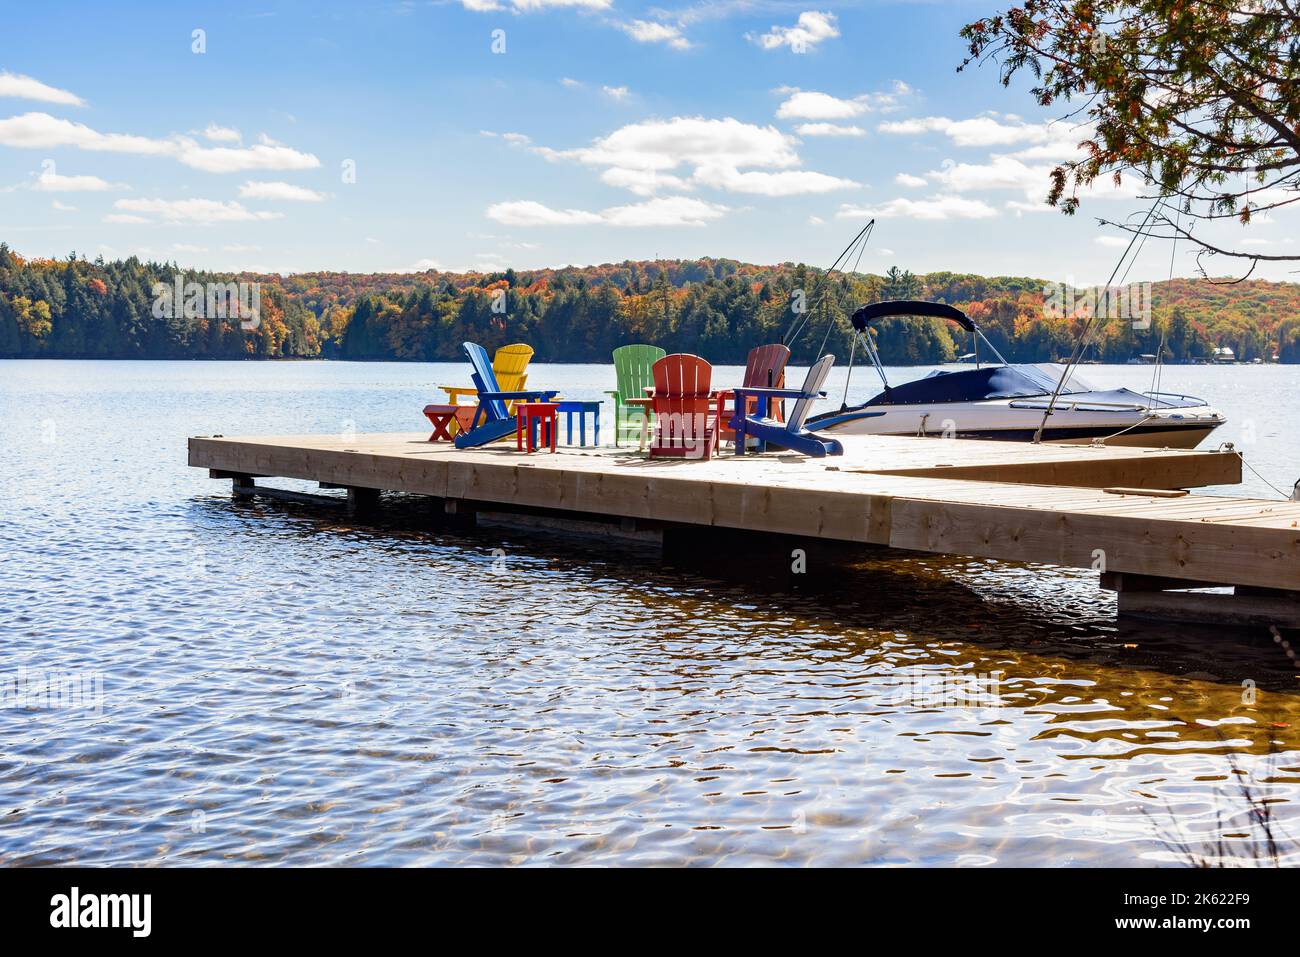 Motorboat tied up to a wooden pier on the shores of a lake on a sunny autumn day. Colourful armchairs are on the pier. Stock Photo